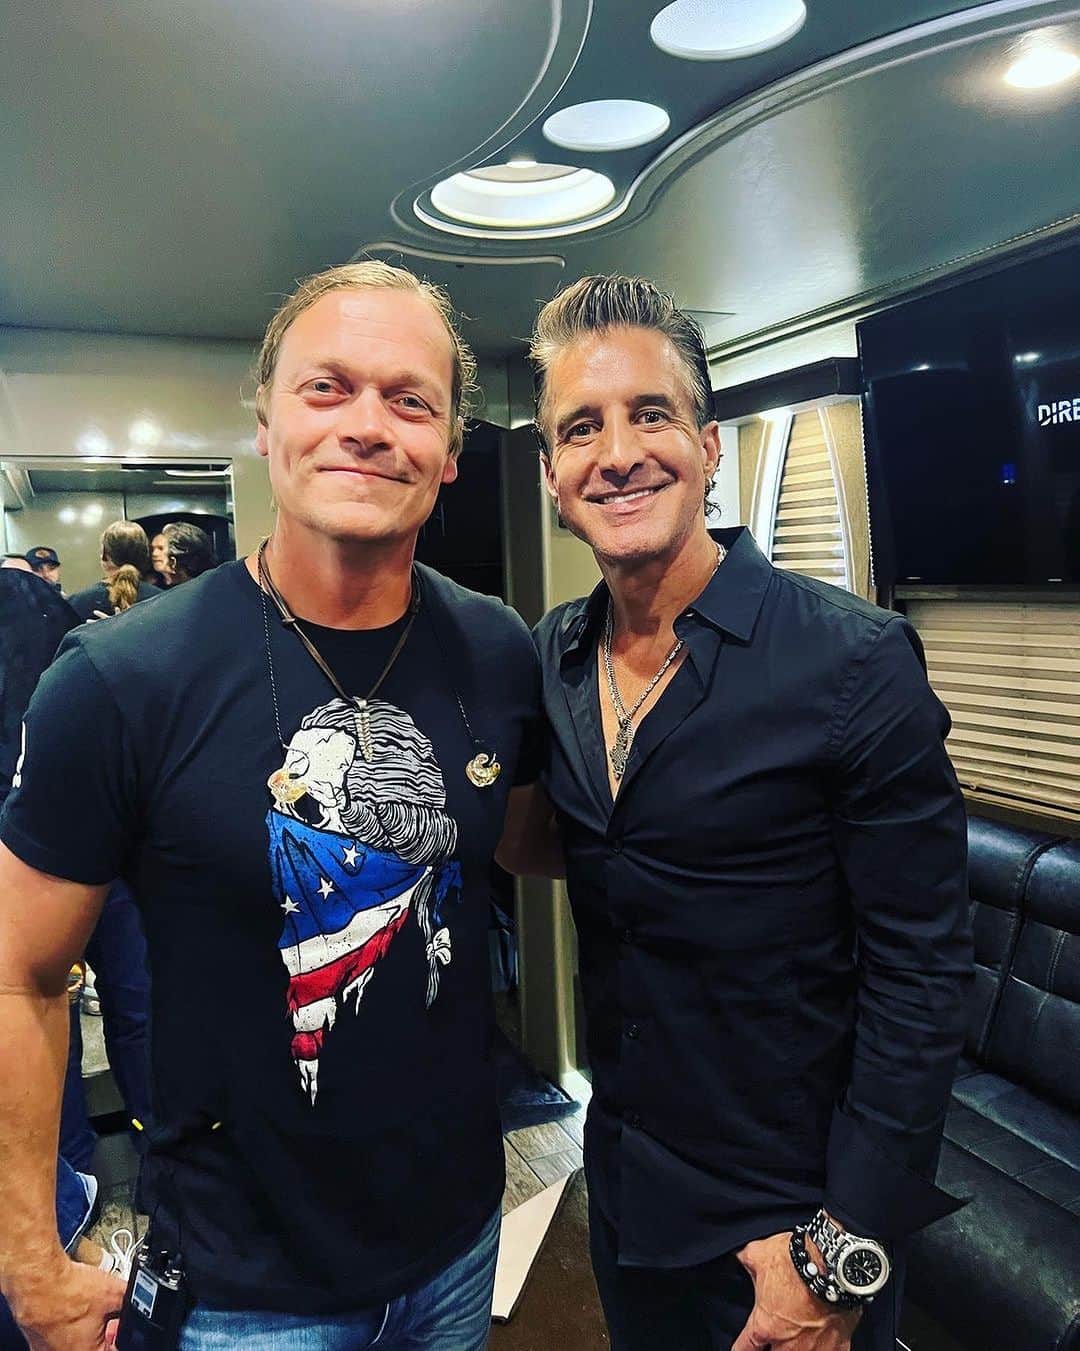 3 Doors Downのインスタグラム：「Throwin it back this Thursday to Brad & @scottstapp hangin backstage at the Away From The Sun Anniversary Tour! Tickets for the Summer of ‘99 Tour go on sale tomorrow at 10am local time. Where will we be seeing you?! 3doorsdown.com」